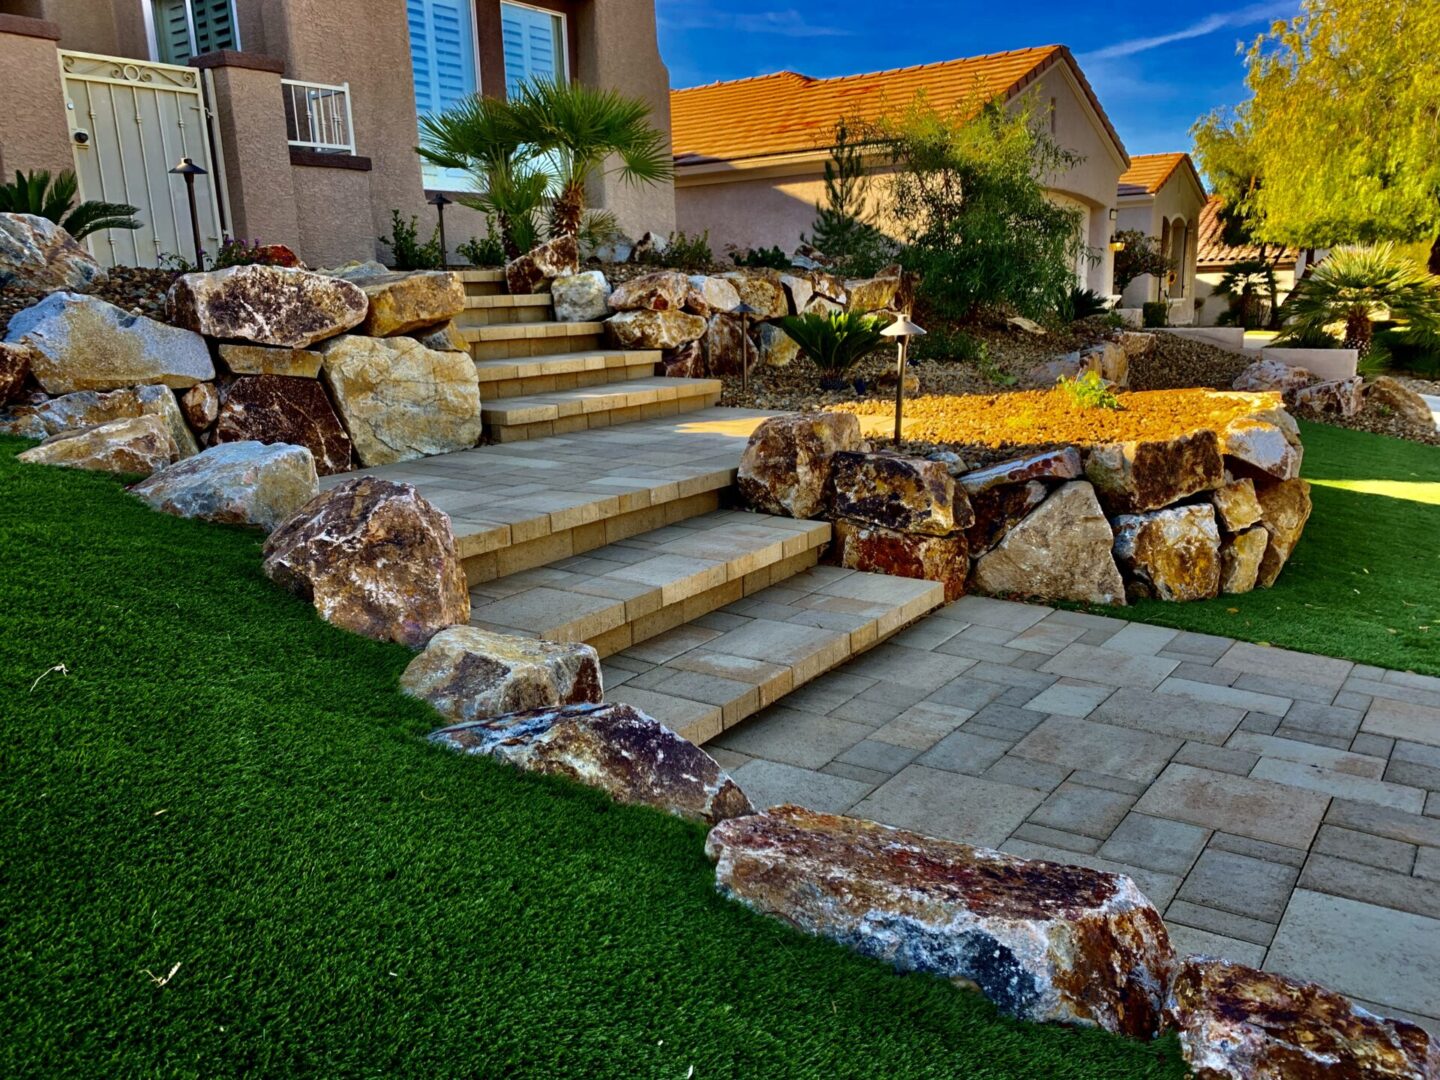 A garden with steps and rocks in the middle of it